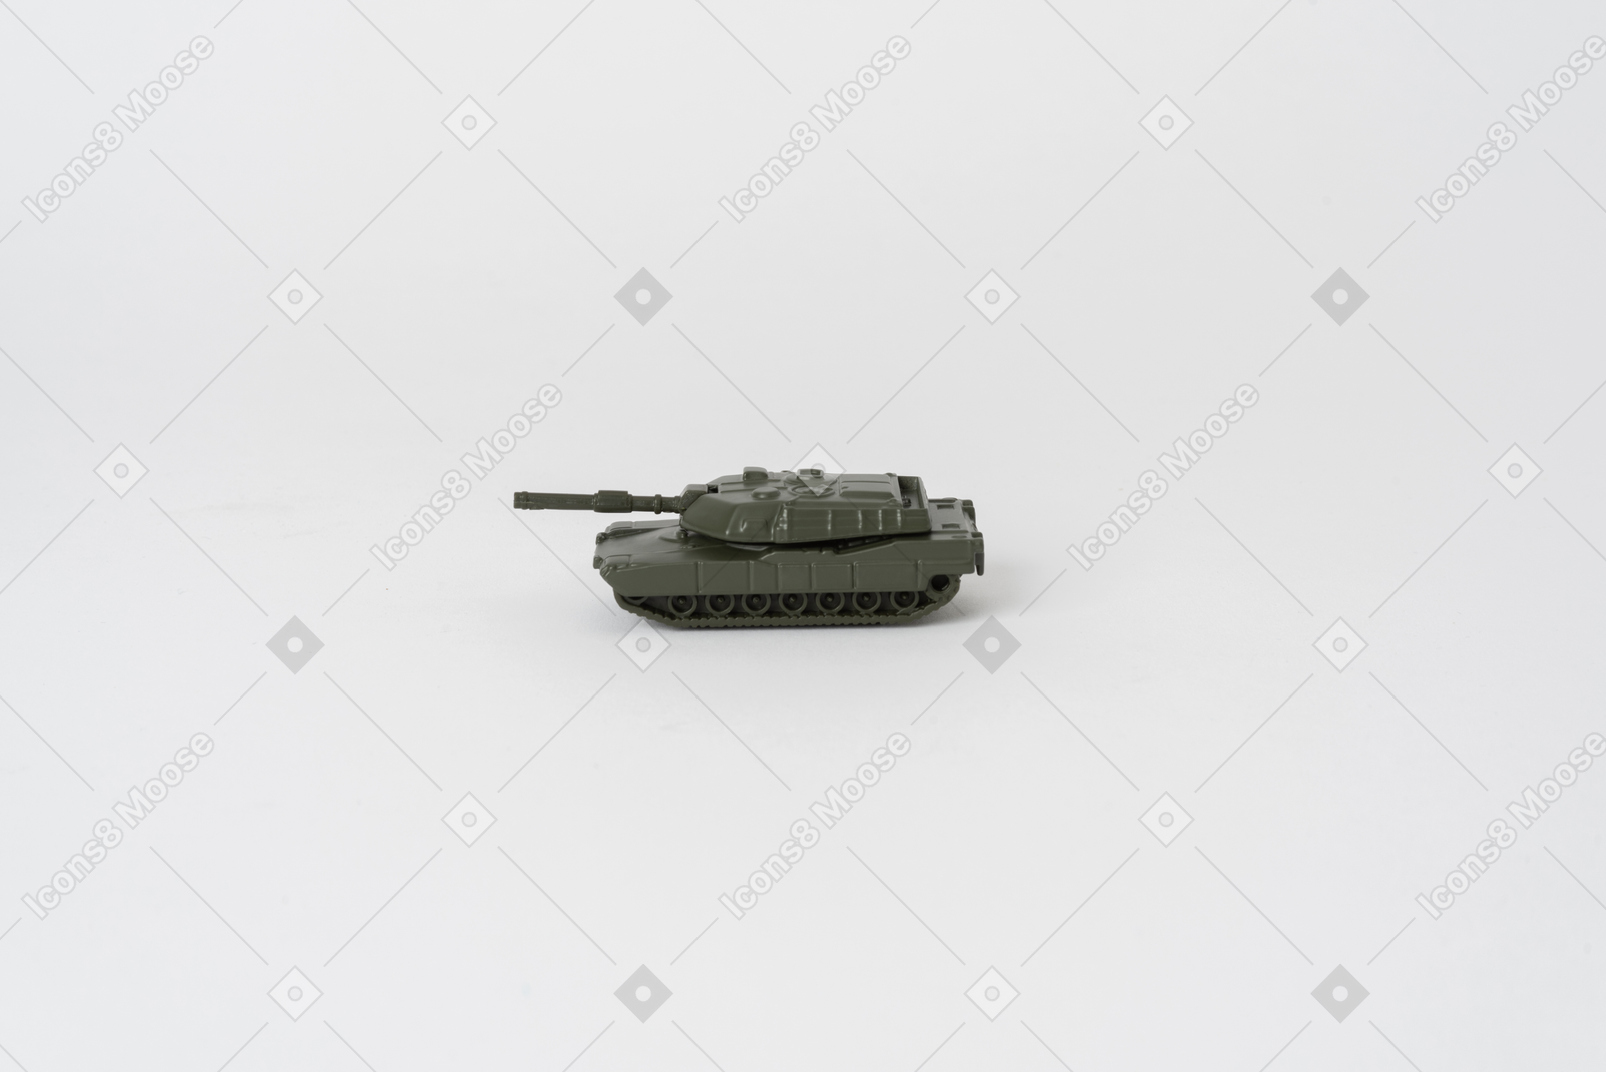 A side shot of a toy tank standing against a plain white background